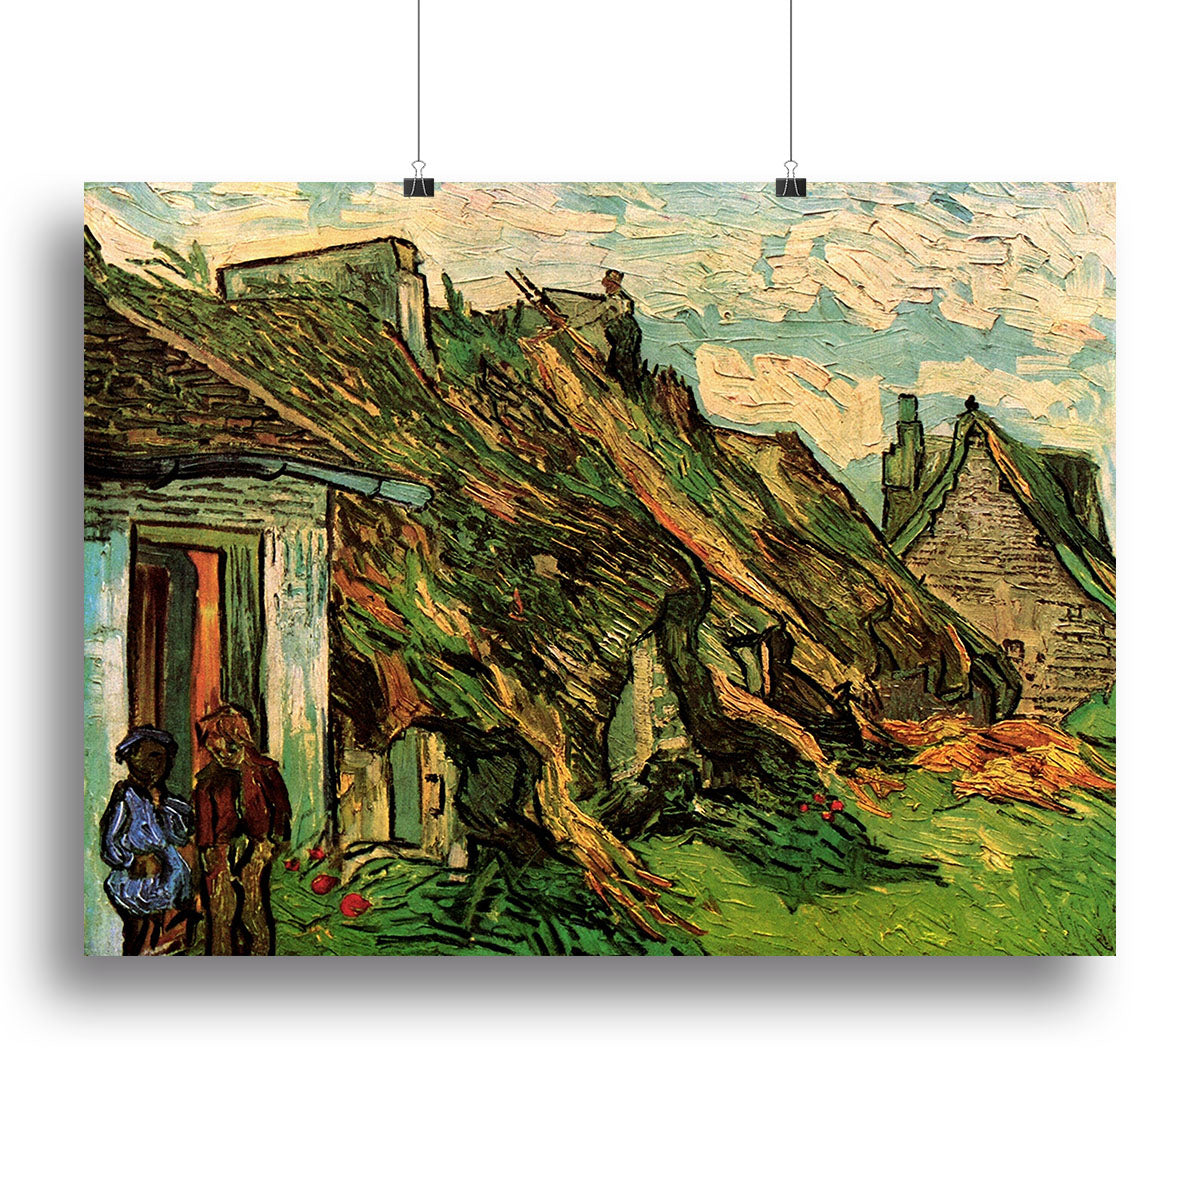 Thatched Sandstone Cottages in Chaponval by Van Gogh Canvas Print or Poster - Canvas Art Rocks - 2